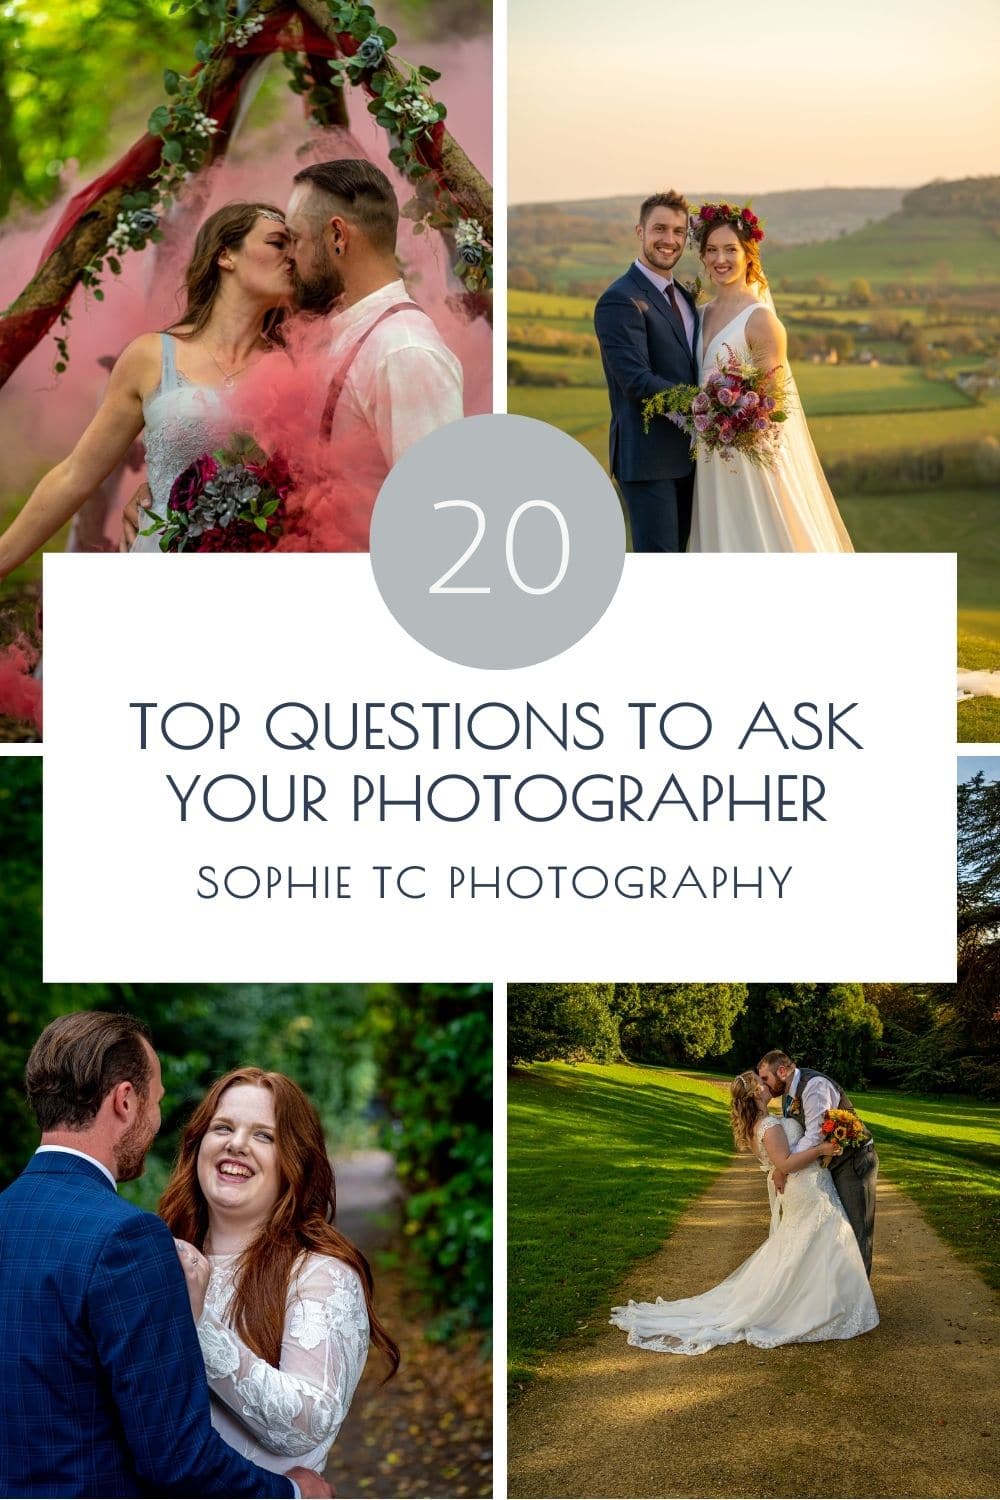 20 Top Questions to ask your Photographer